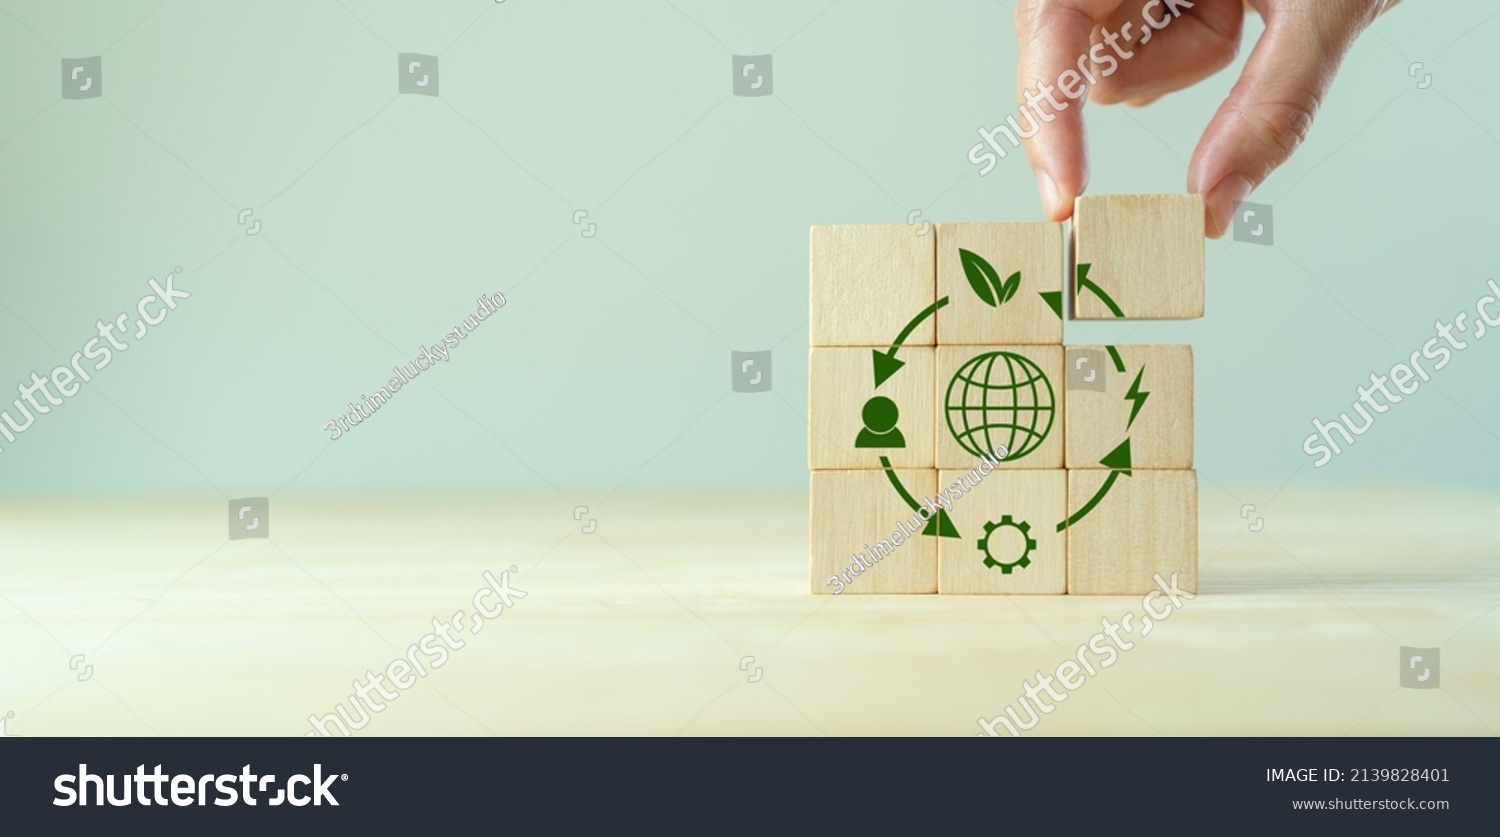 Circular economy concept, recycle, environment, reuse, manufacturing, waste, consumer, resources. LCA Life cycle assessment. Sustainability Wooden cubes; symbol of circular economy on grey background. #2139828401